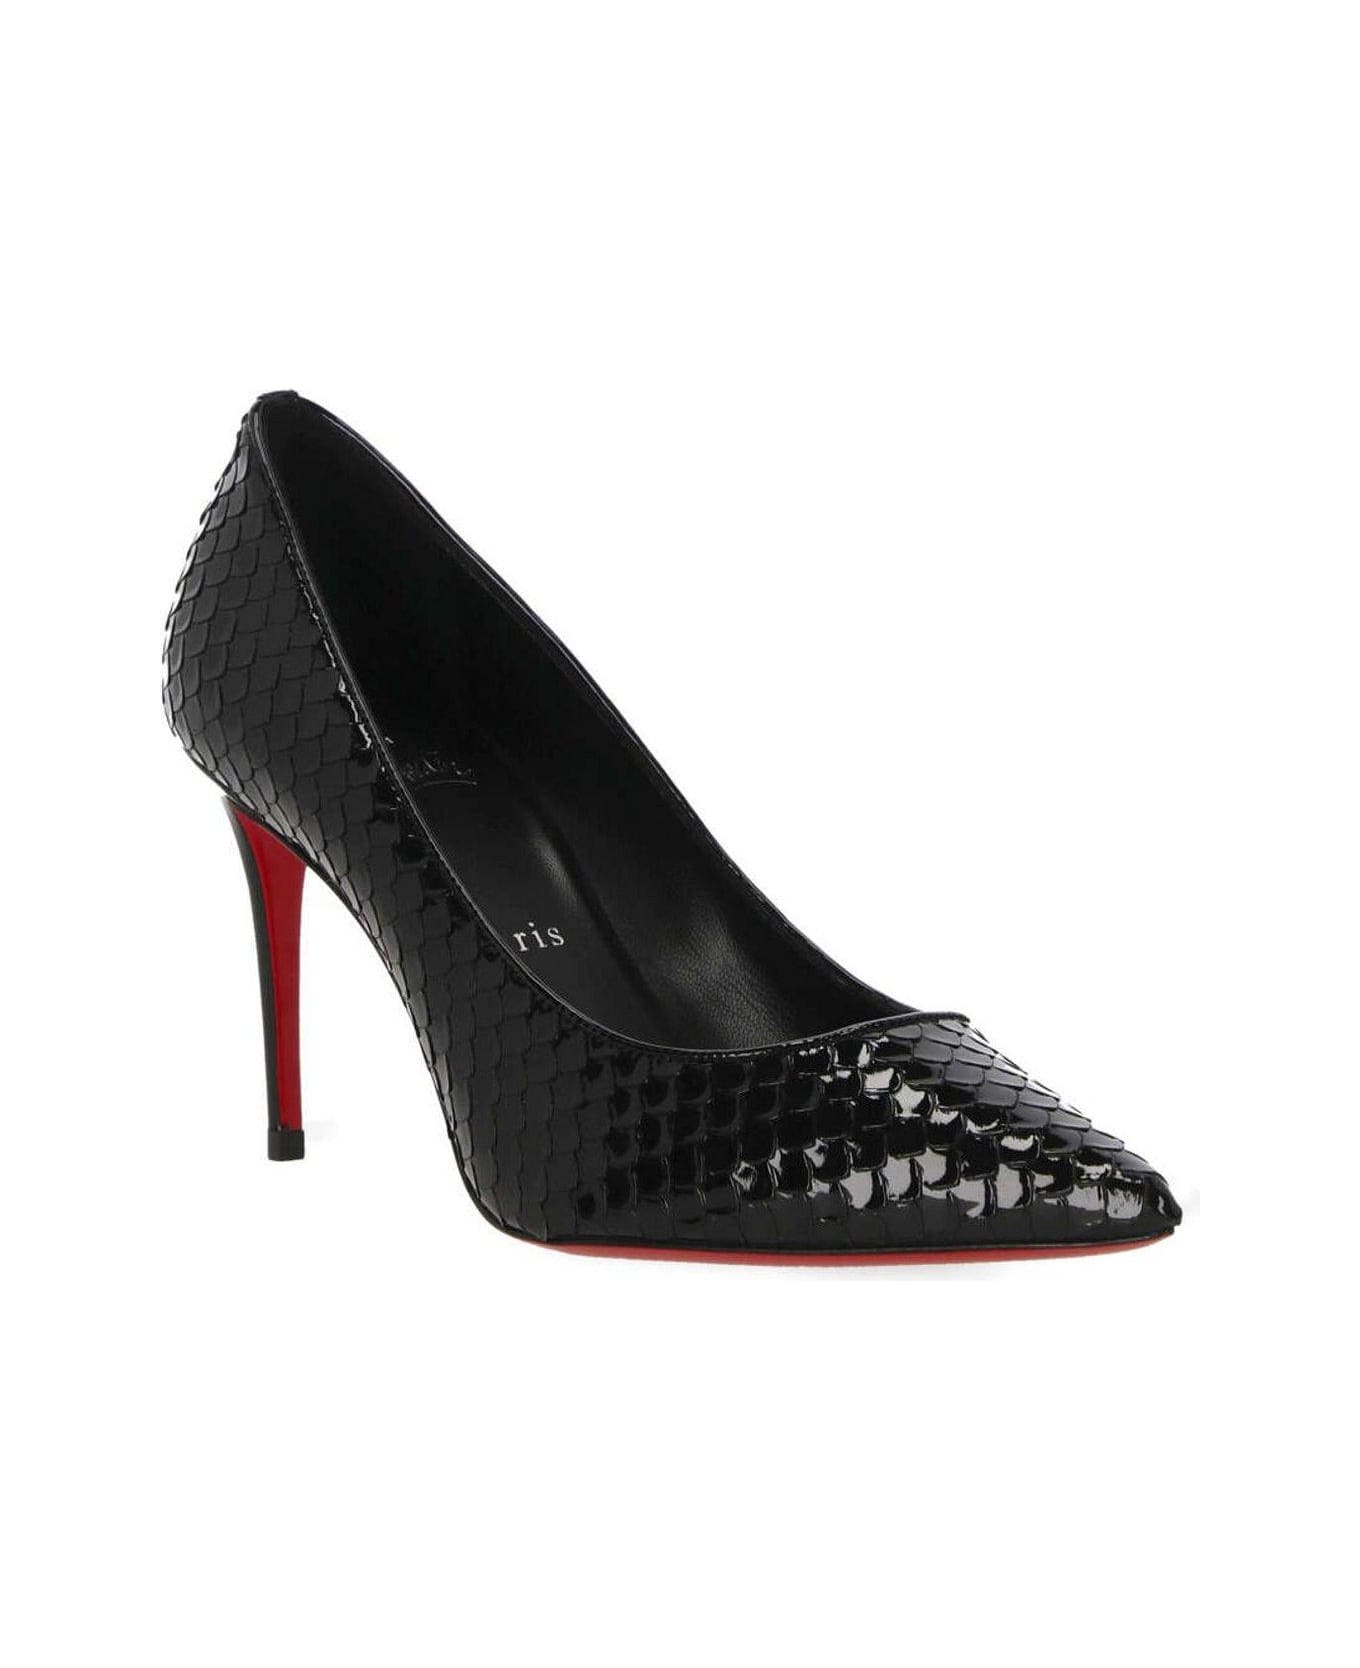 Christian Louboutin Embossed Pointed-toe Pumps